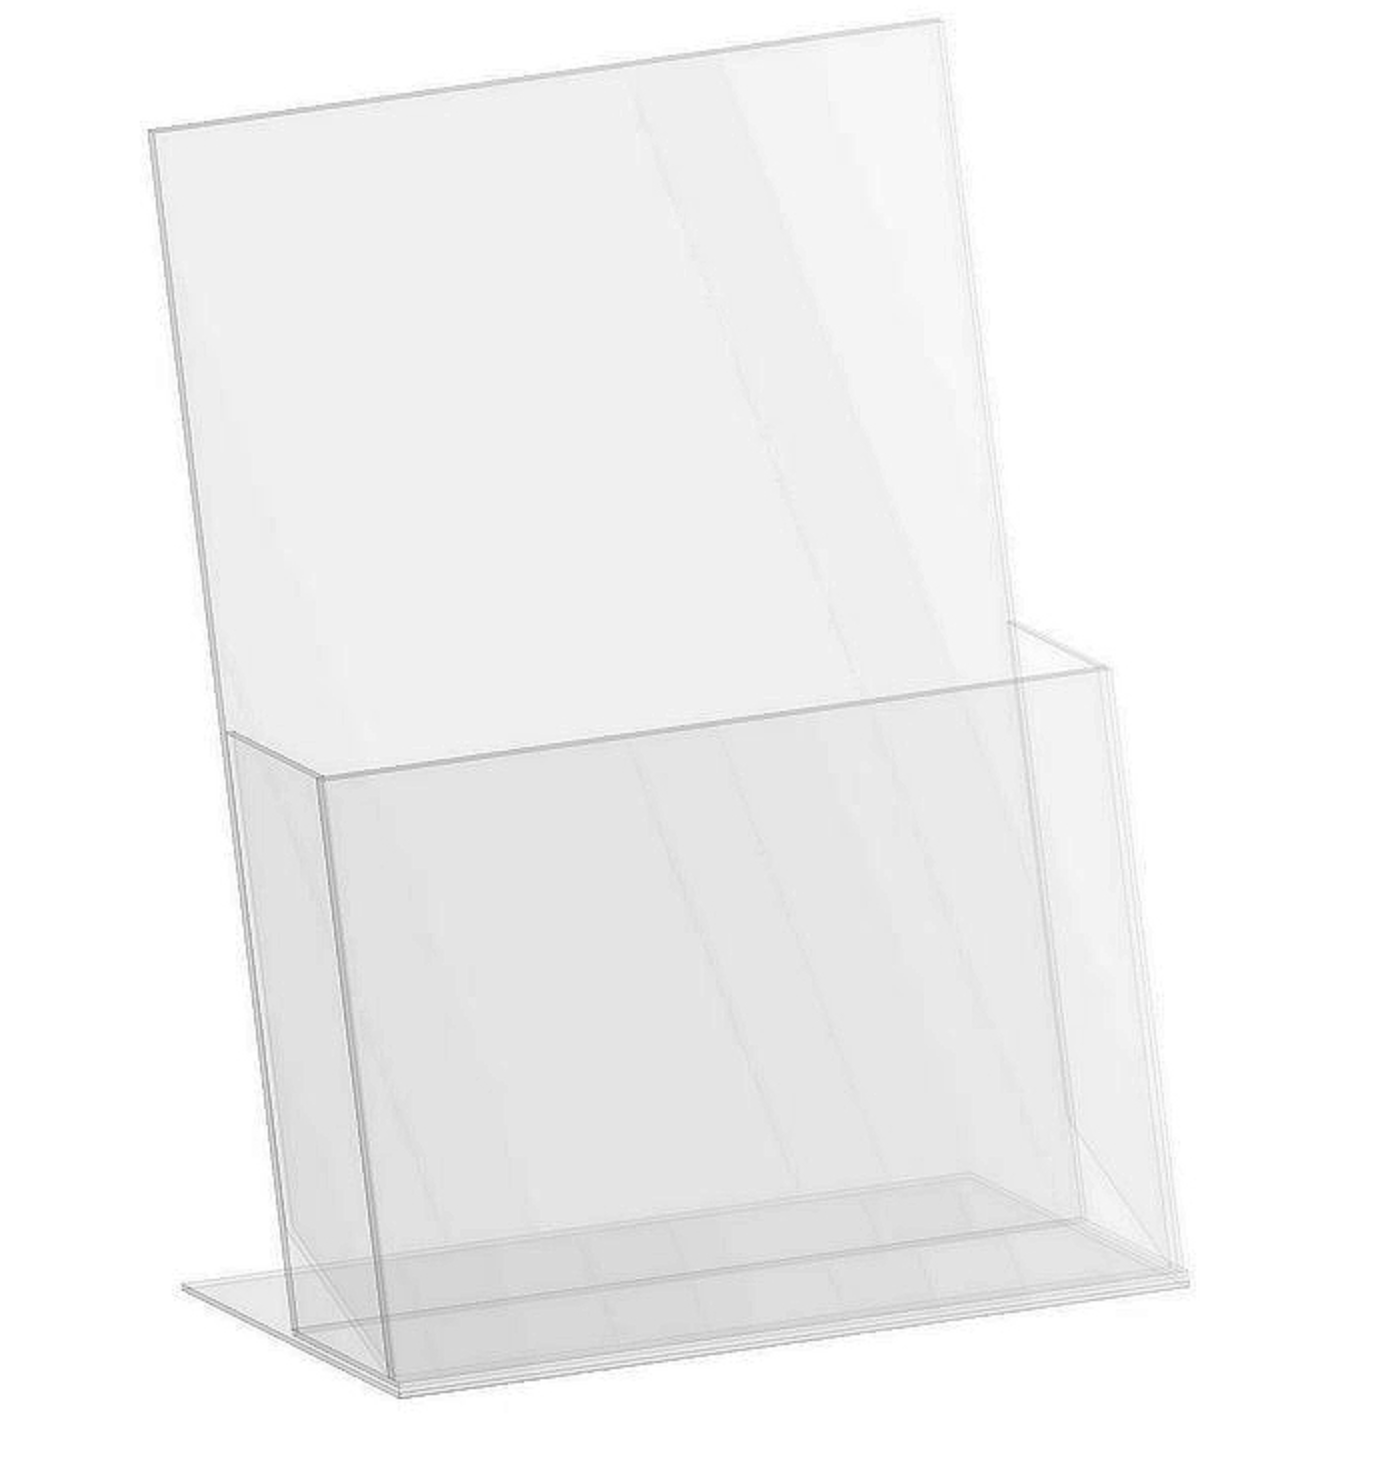 A4 Brochure holder stand | Perspex